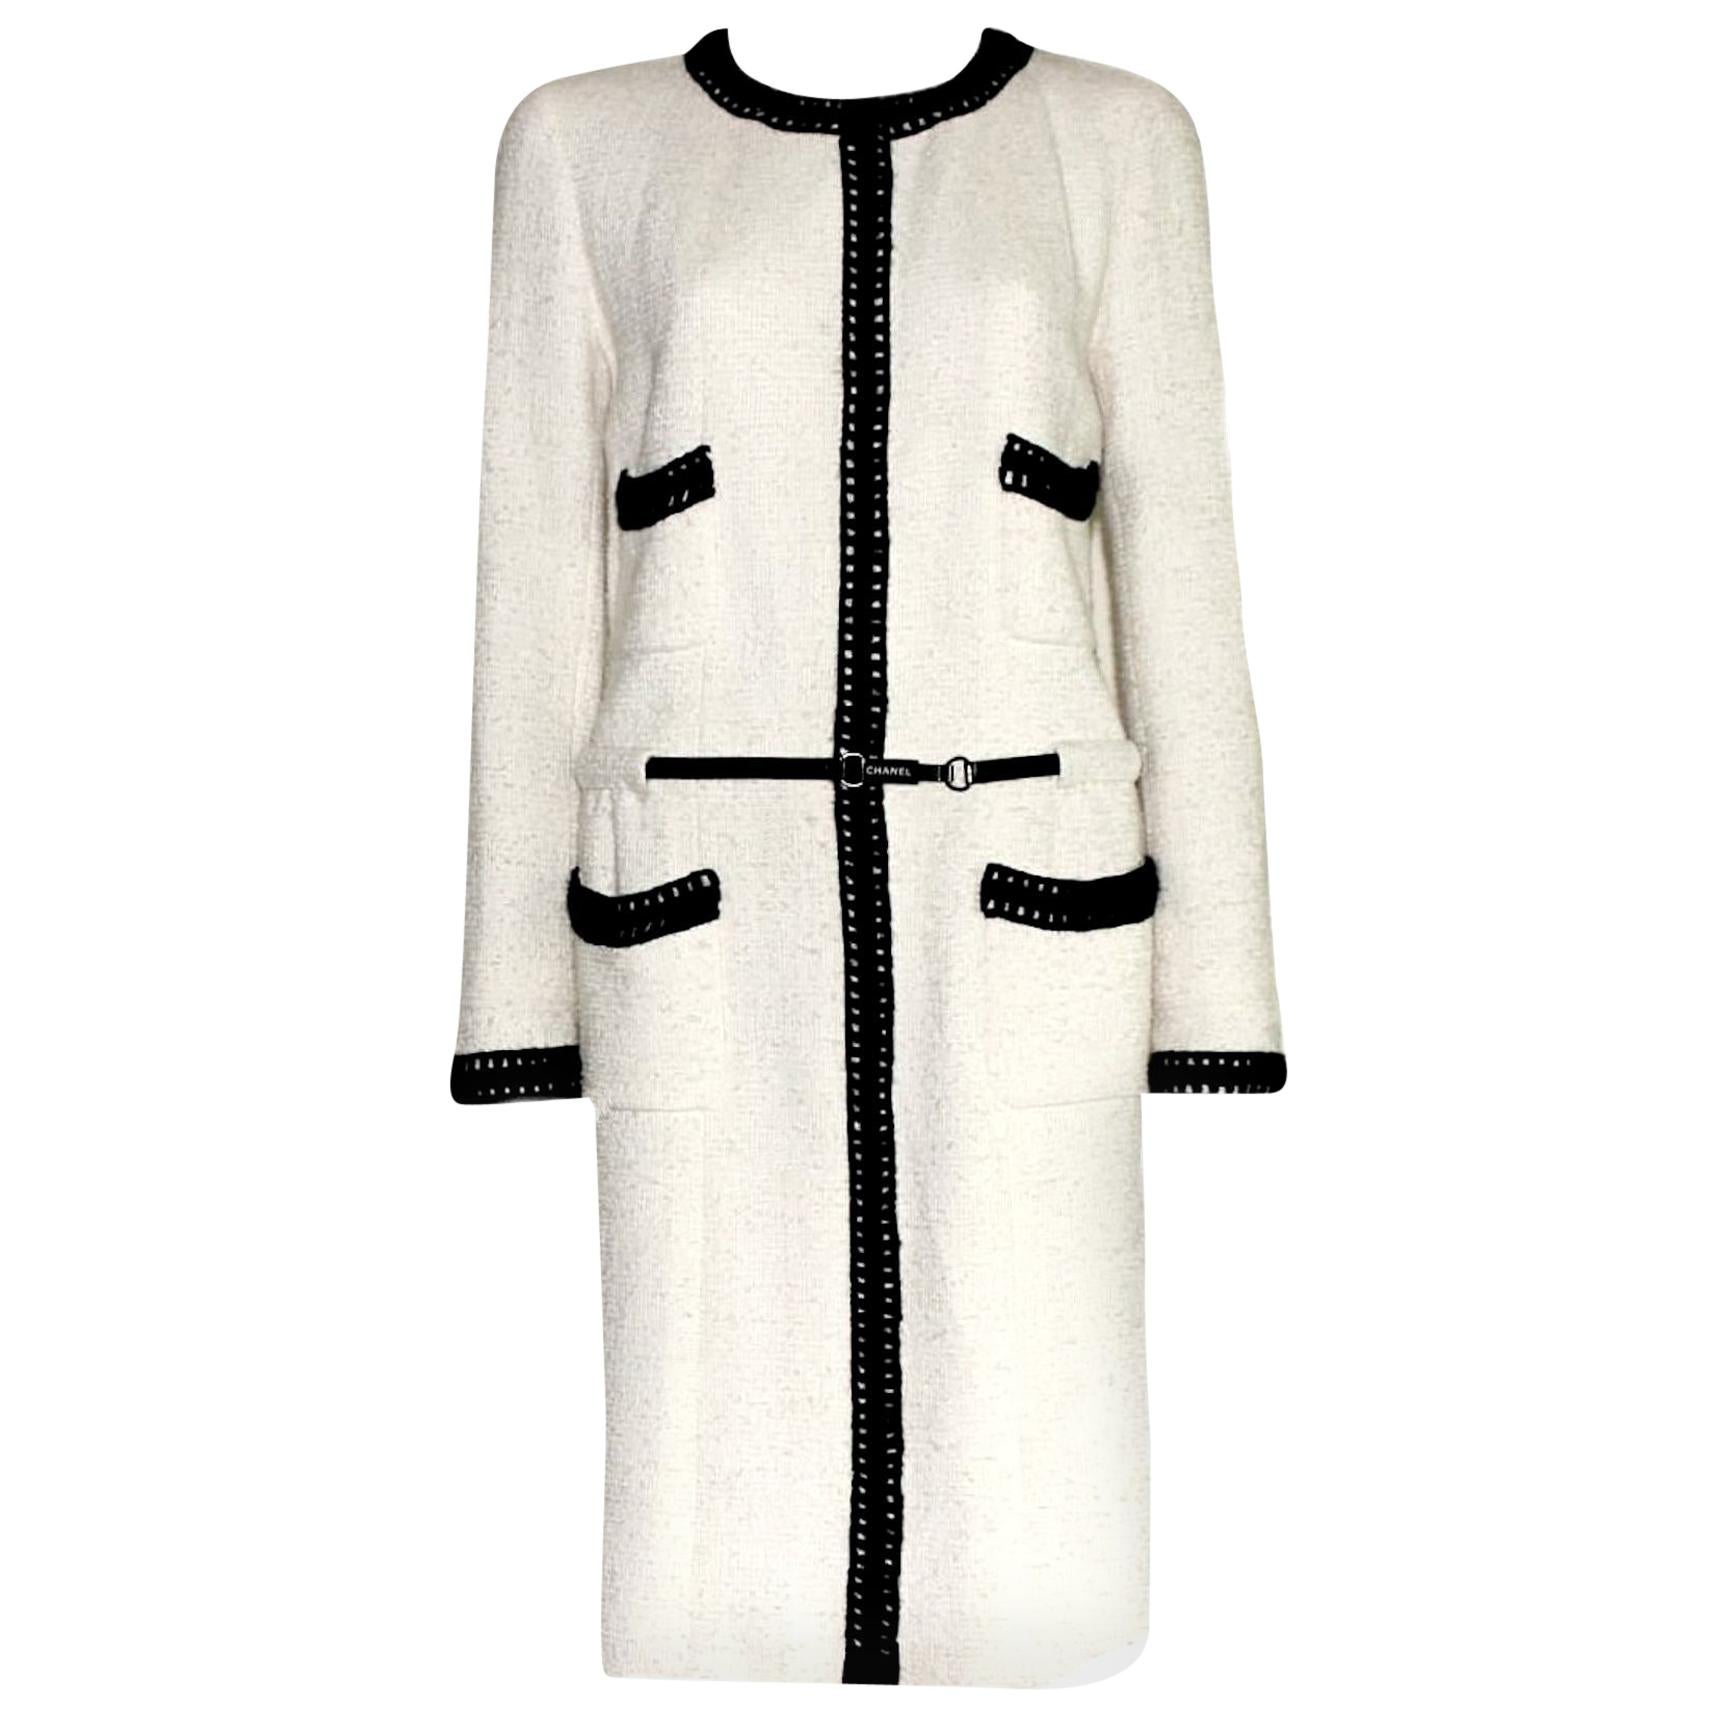 NEW Chanel Signature Tweed White and Black Coat with "CHANEL" Belt and CC Logo